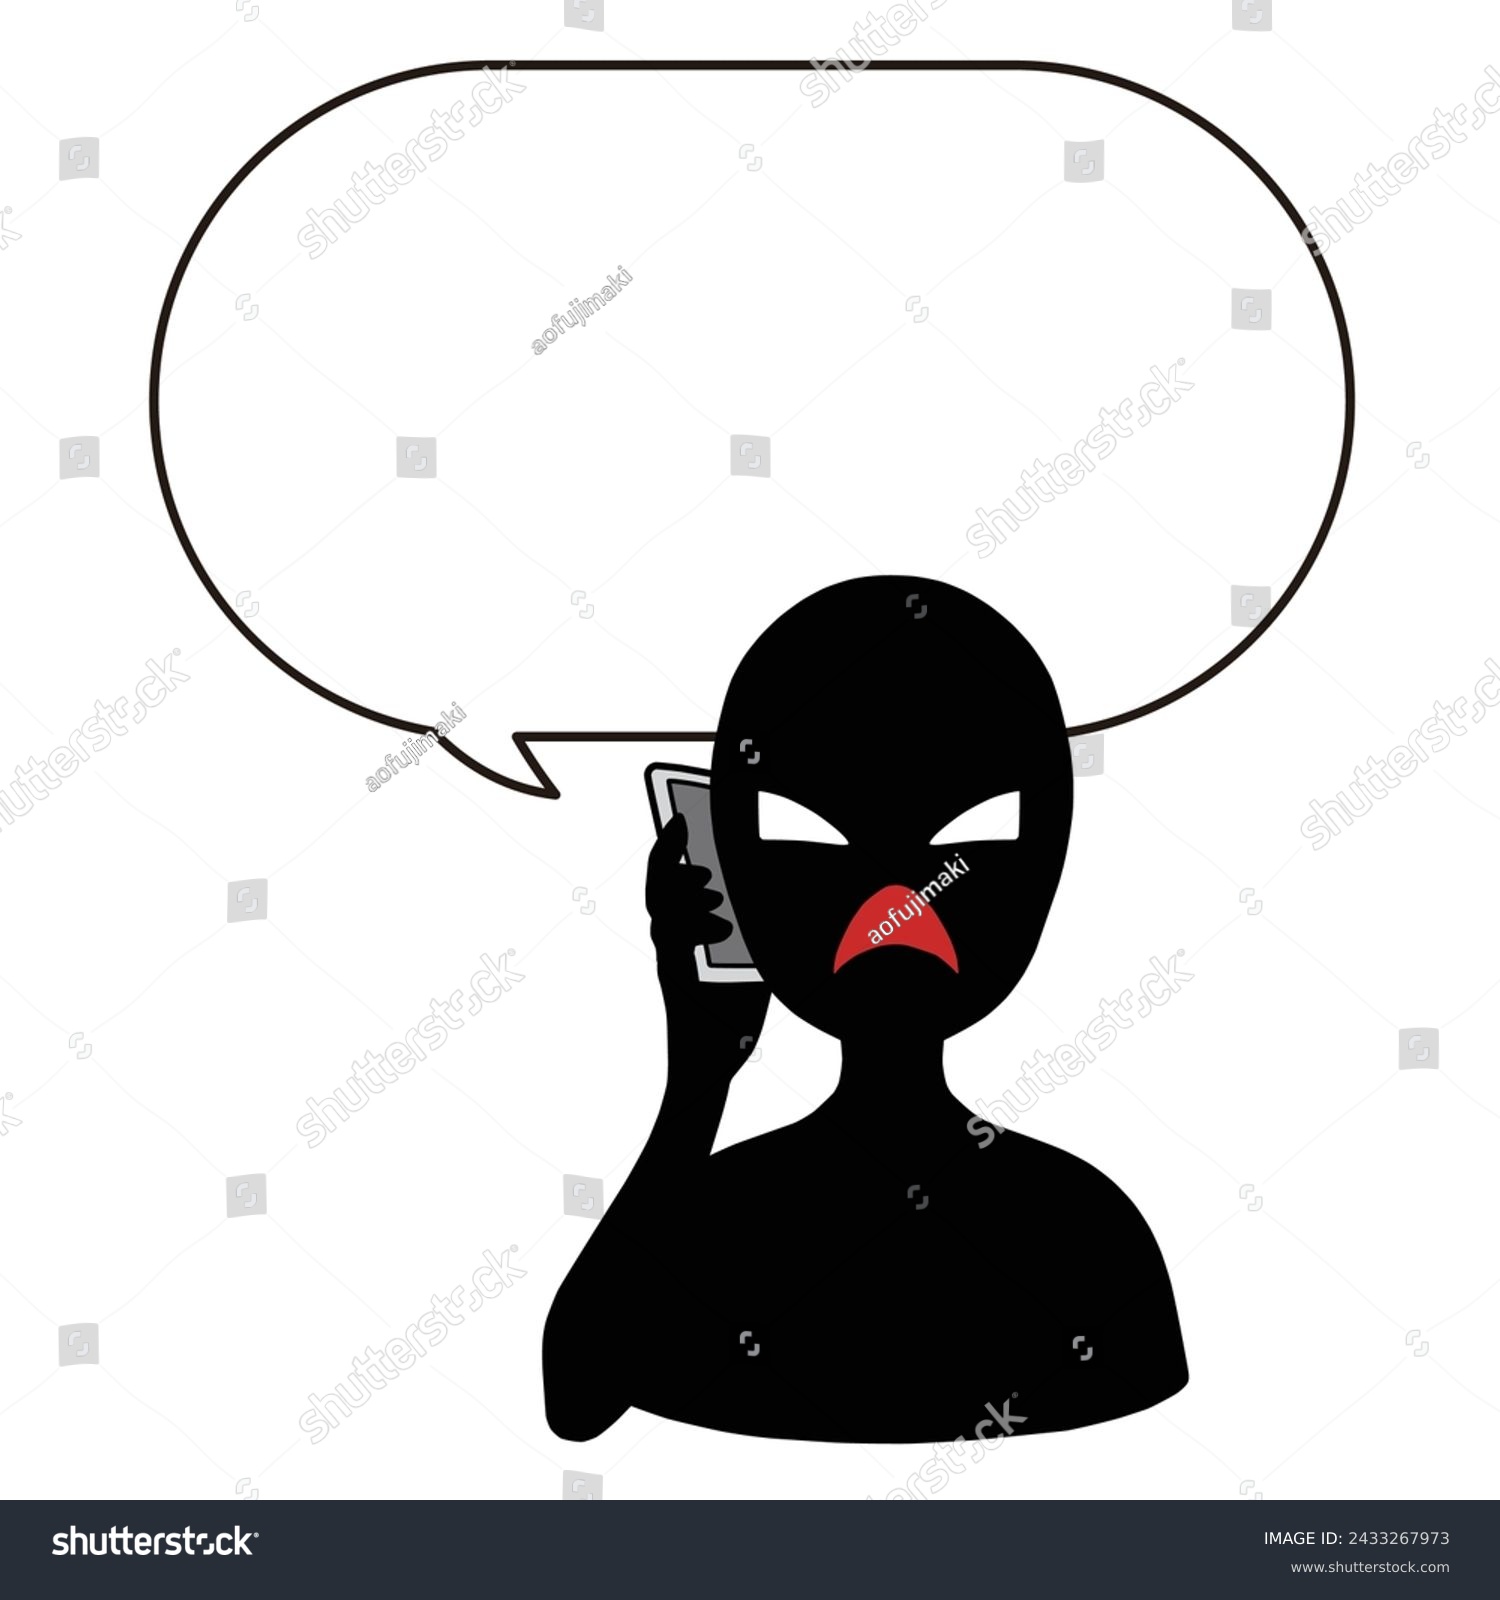 SVG of Illustration material of a person with the image of a bad guy holding a smartphone and a speech bubble svg